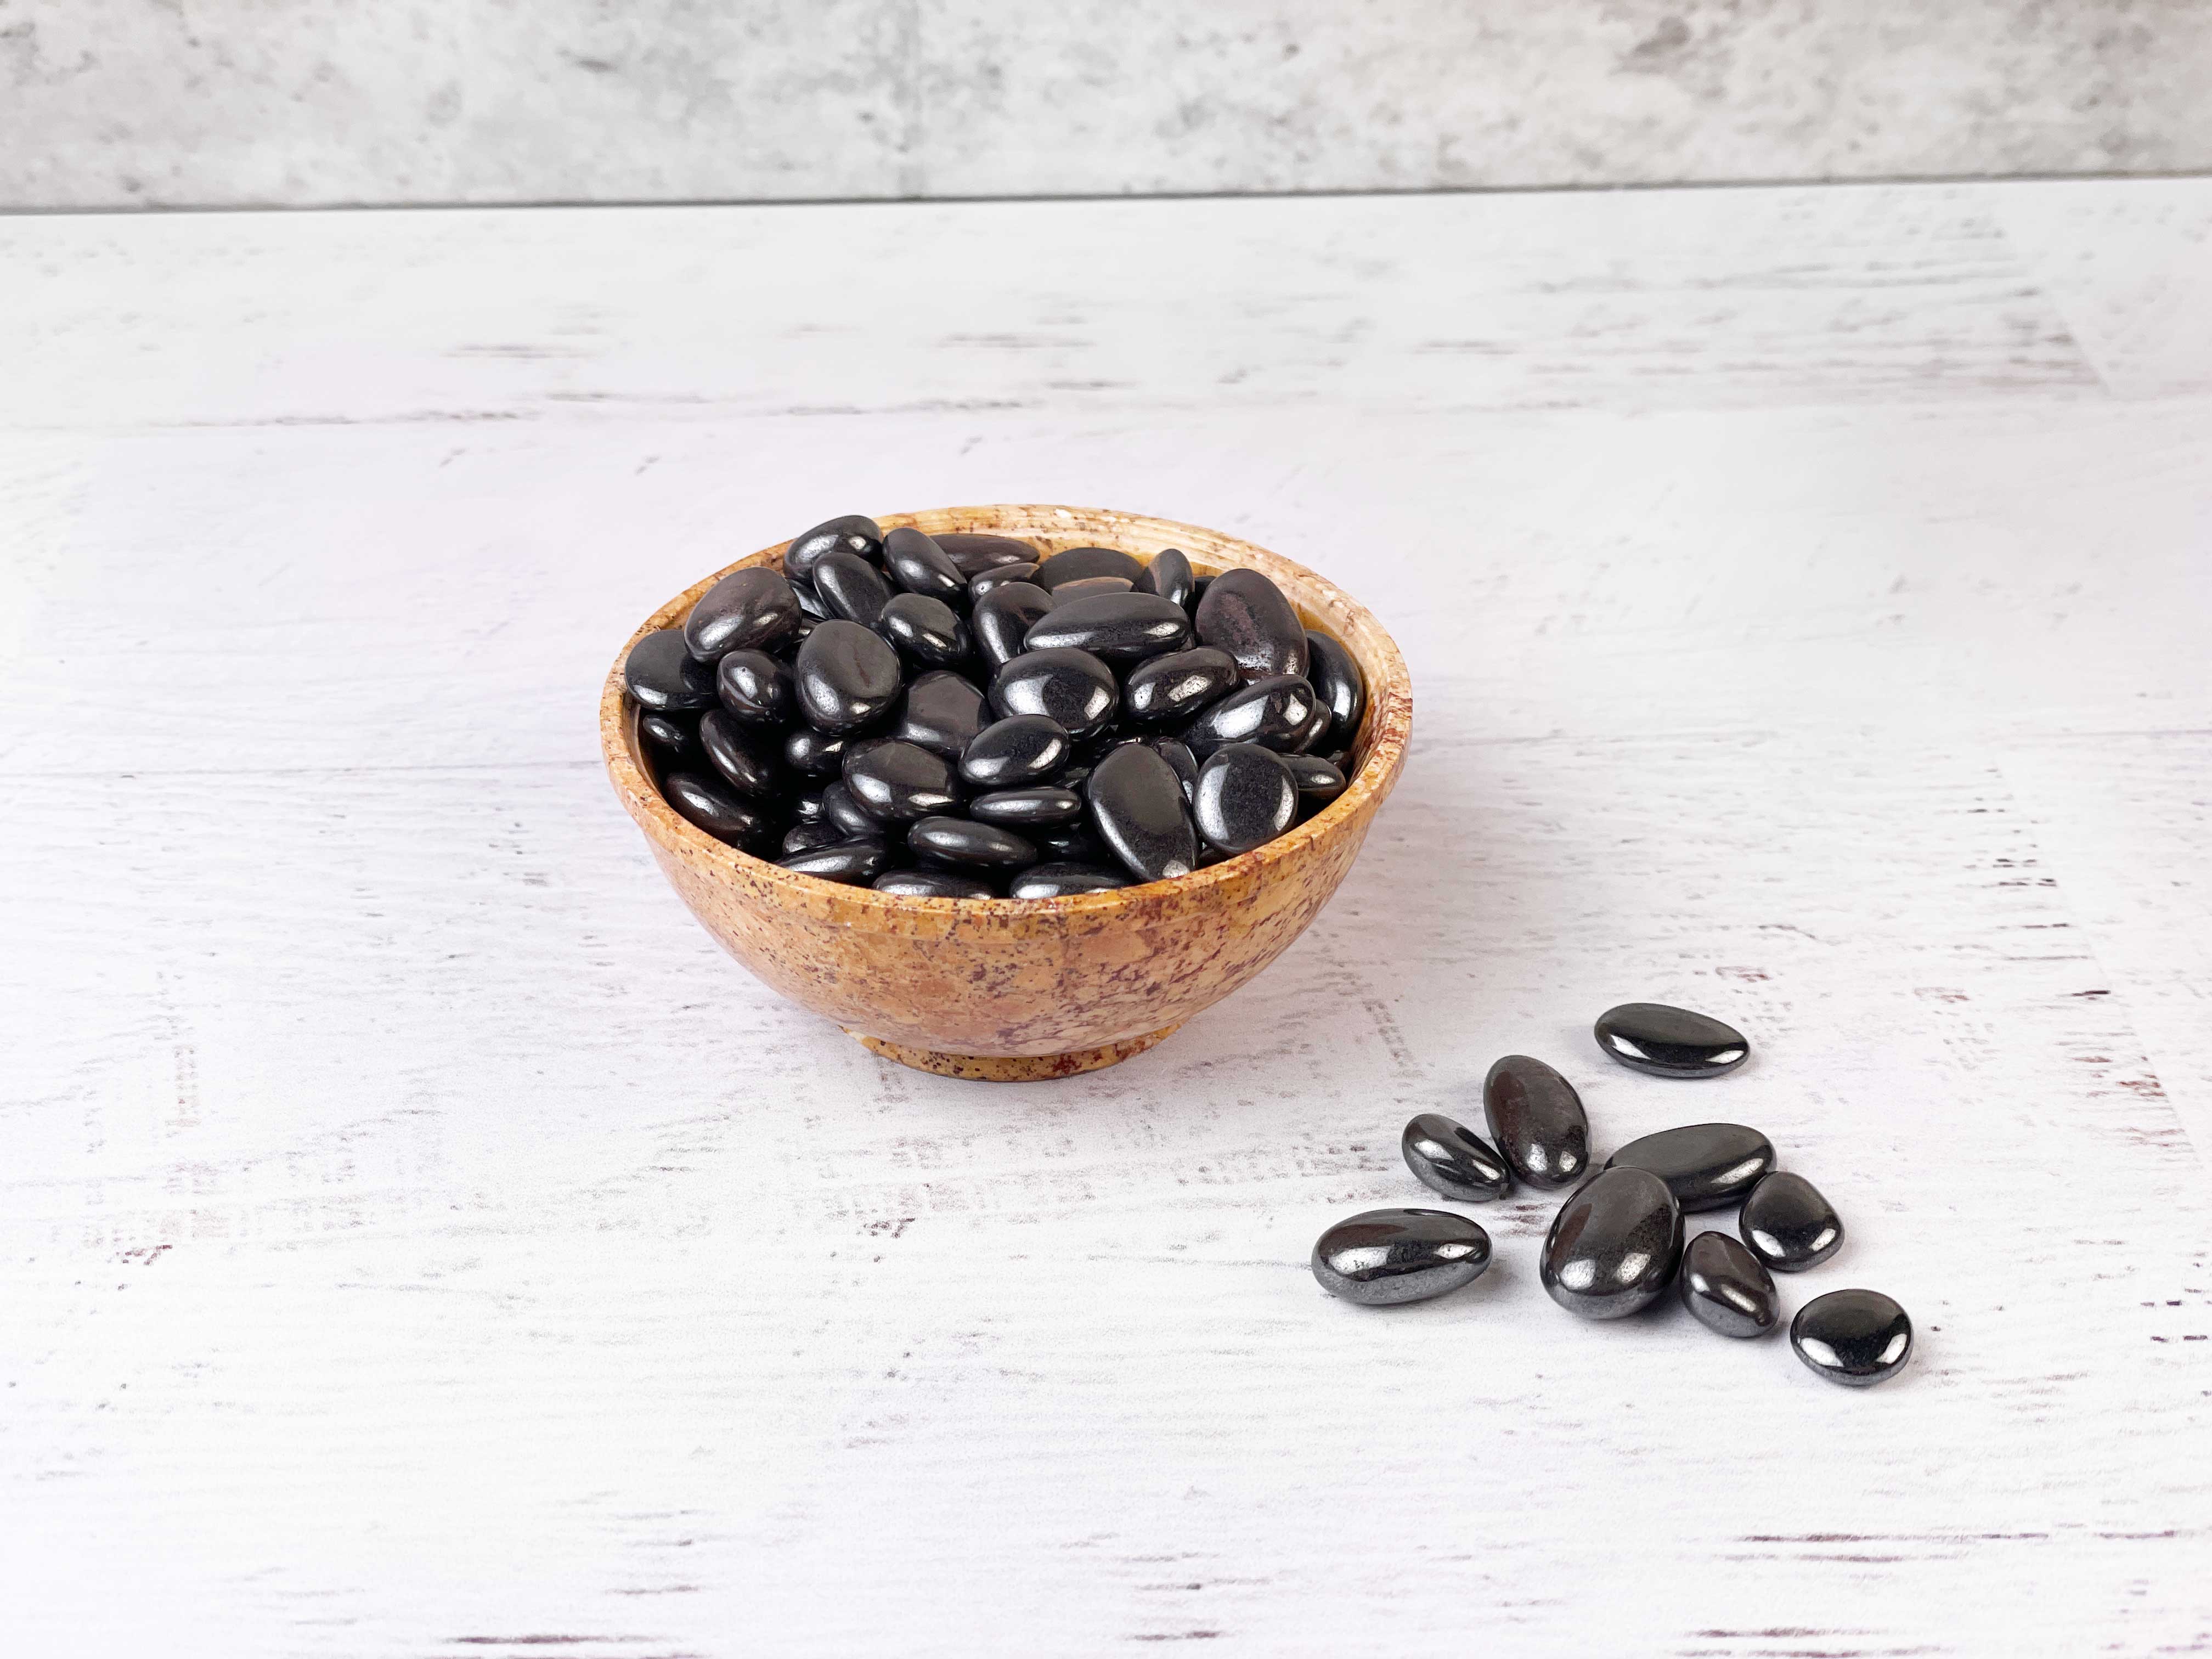 Buy Online Latest and Unique Tumbled Hematite - Grounding, Manifestation, Courage, Yin Yang Balance | Shop Best Spiritual Items - The Mystical Ritual